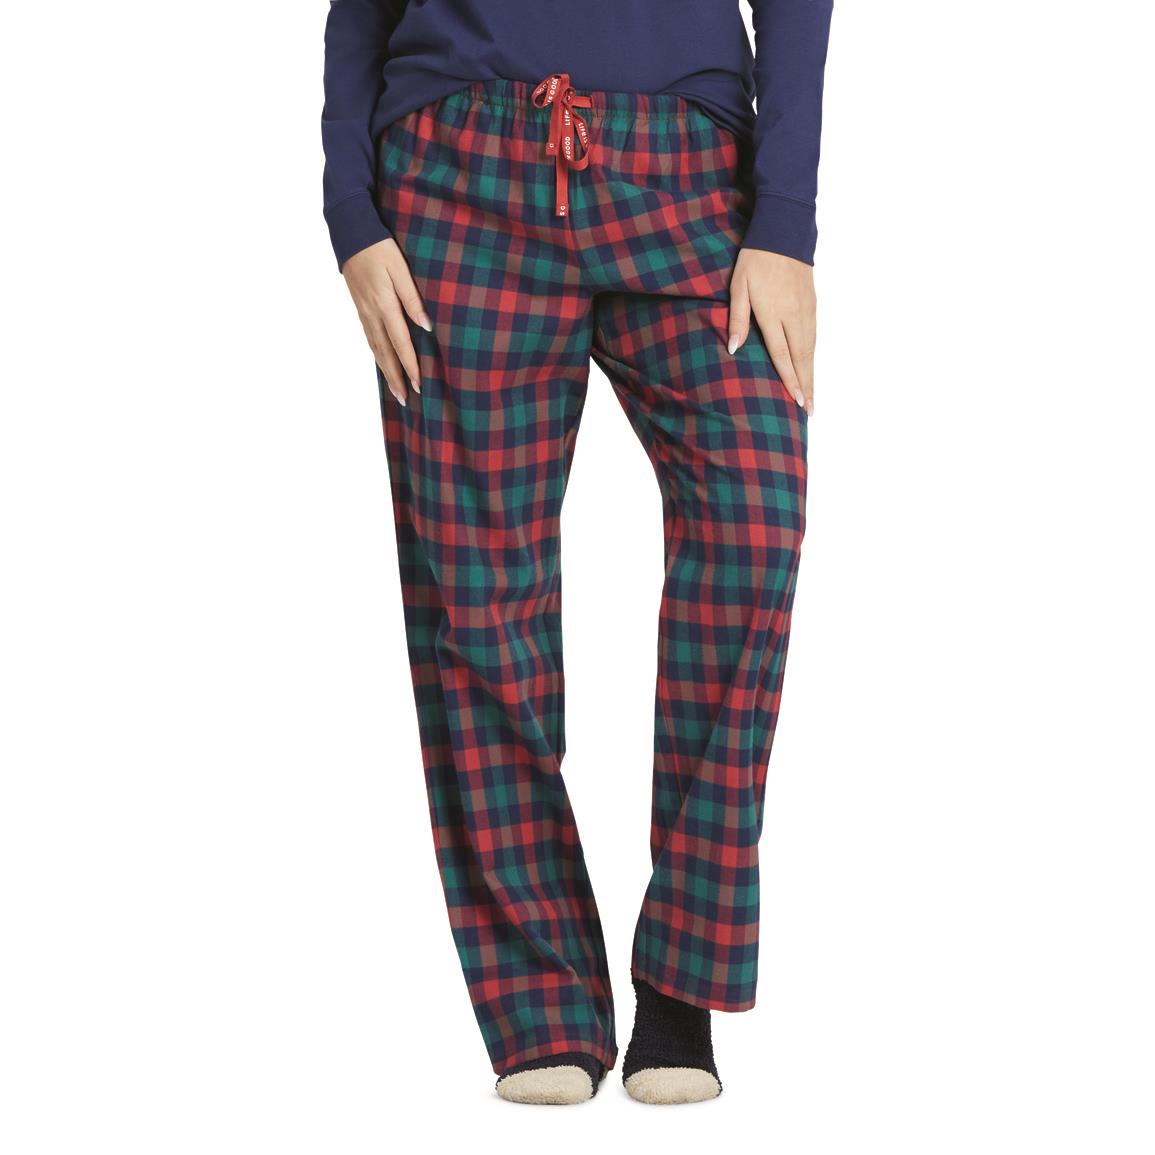 Life Is Good Women's Holiday Red Check Classic Sleep Pants, Faded Red